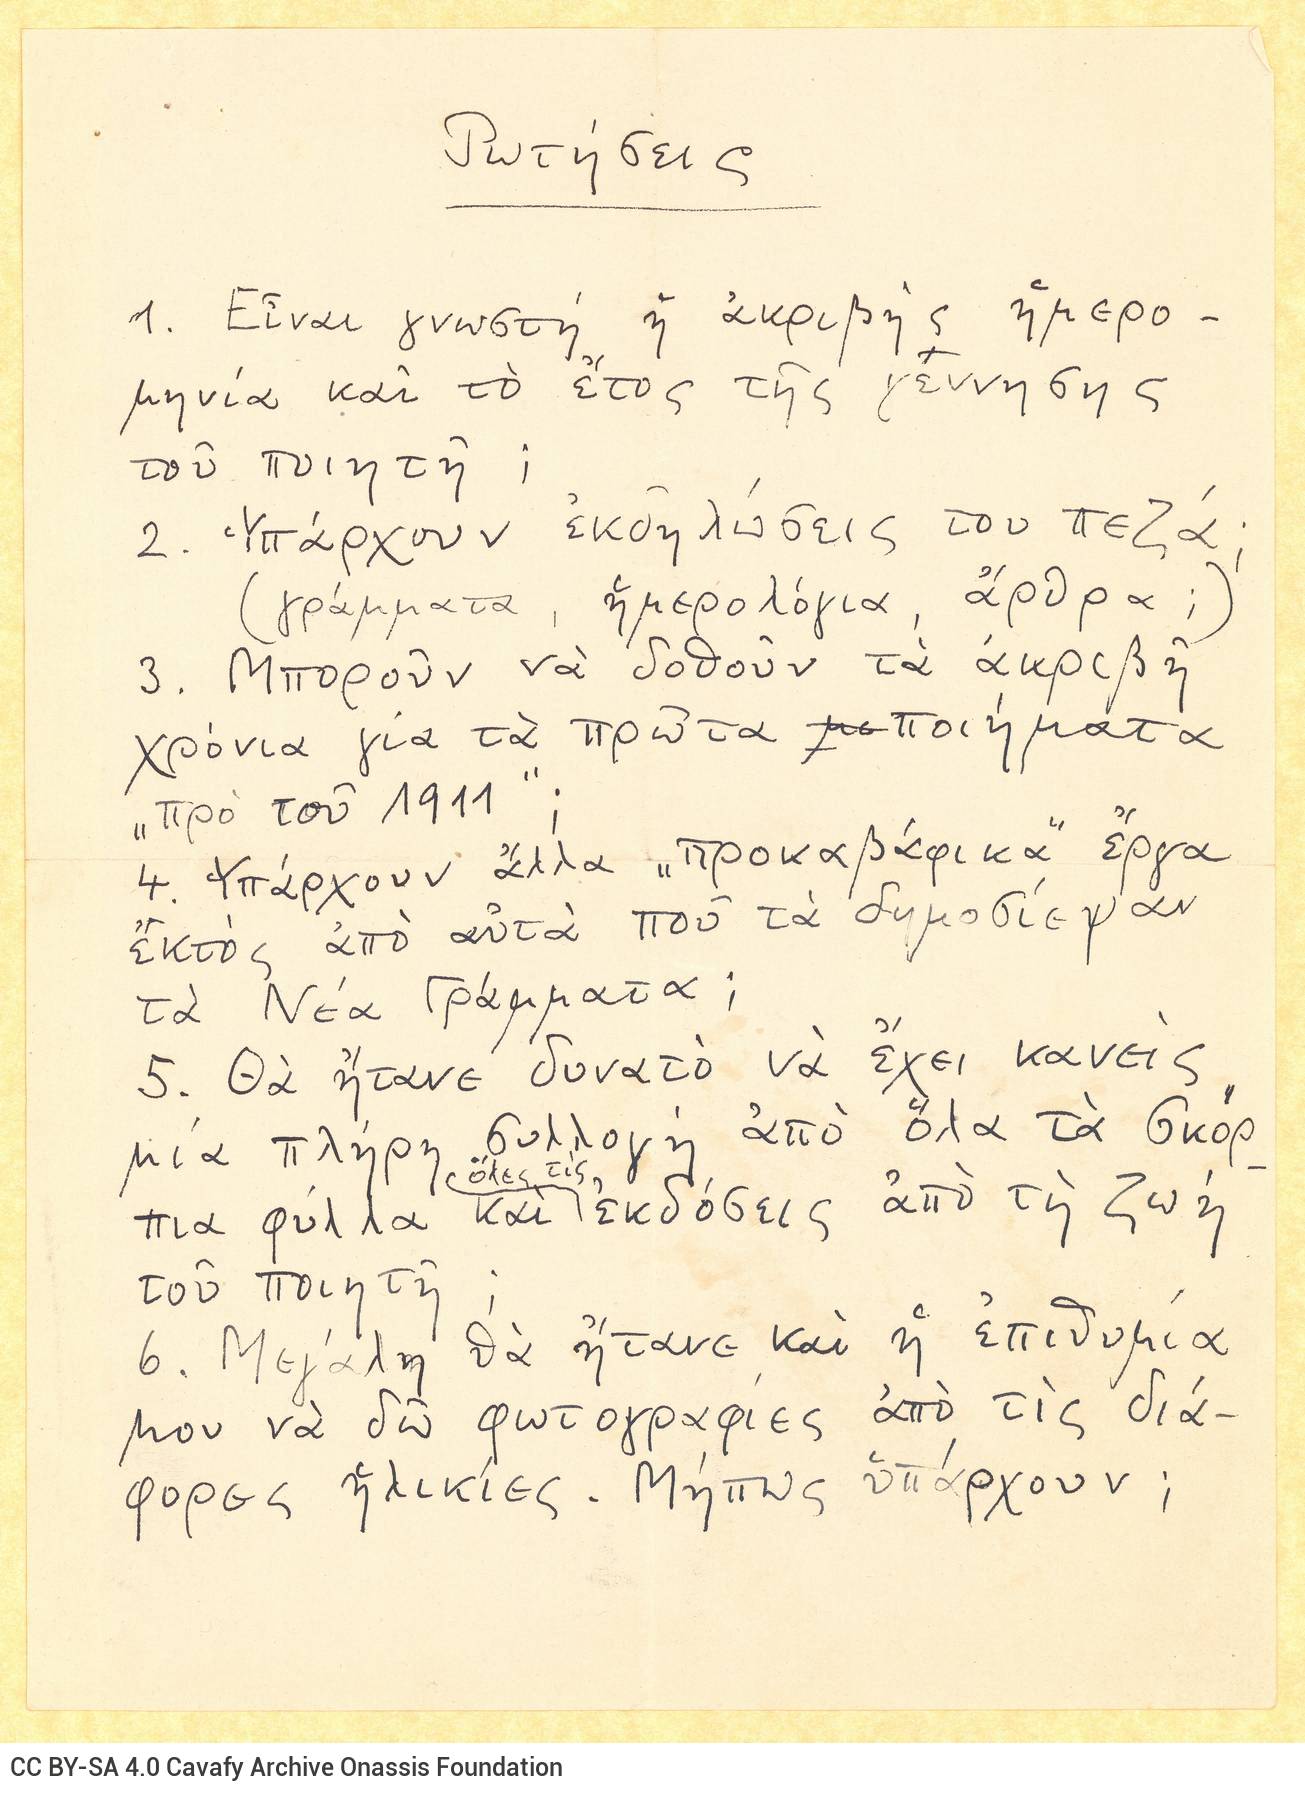 Handwritten letter by Helmut von den Steinen to Rica Singopoulo on both sides of a sheet and on the recto of a second sheet, 